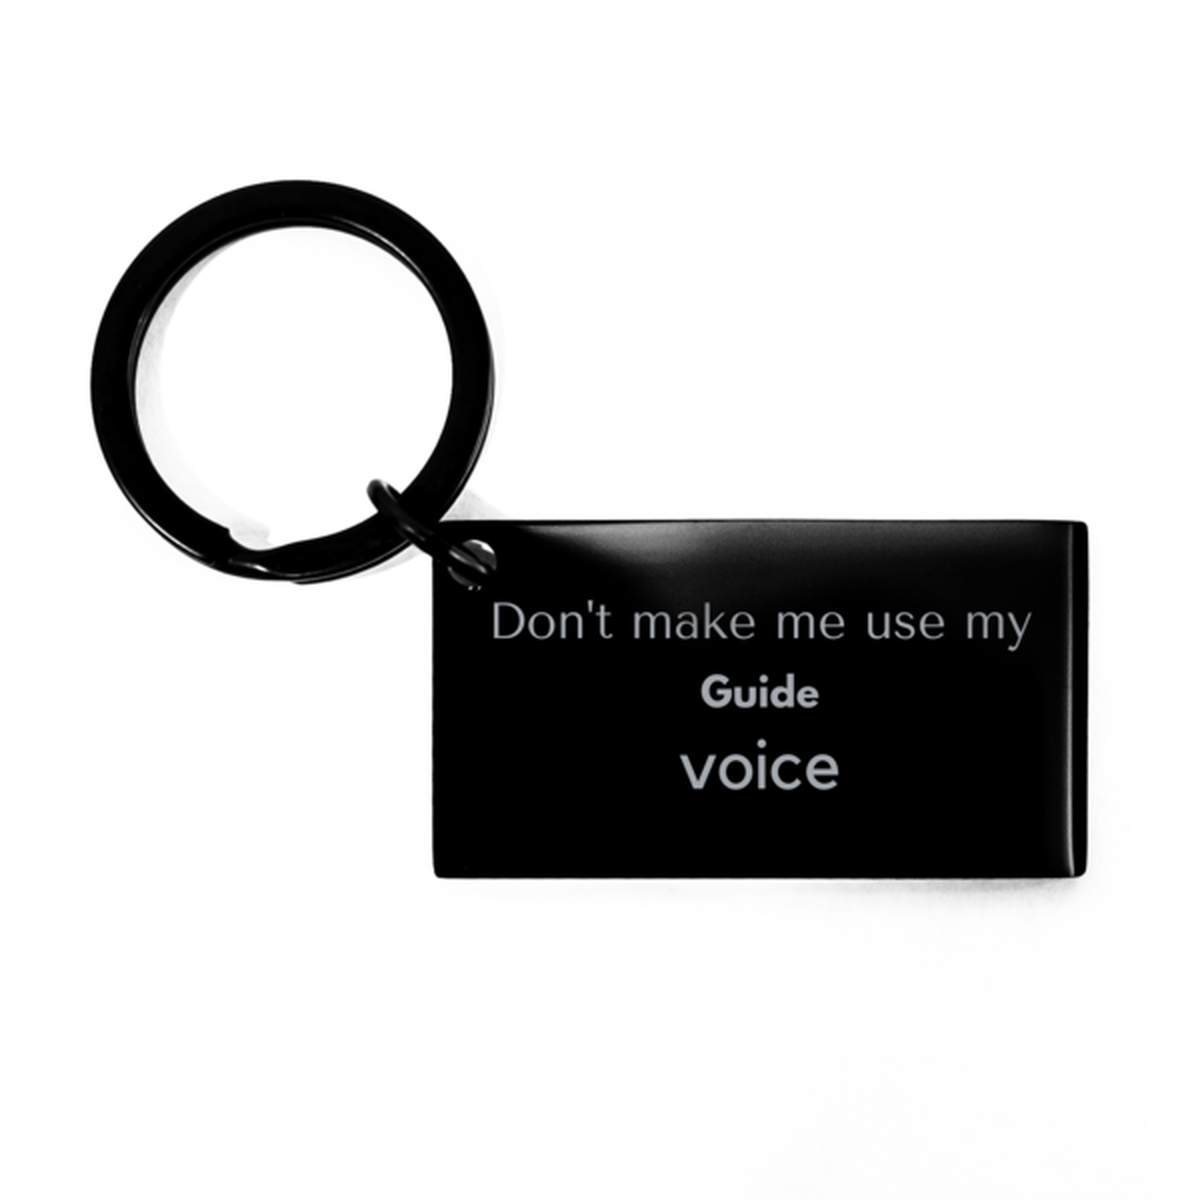 Don't make me use my Guide voice, Sarcasm Guide Gifts, Christmas Guide Keychain Birthday Unique Gifts For Guide Coworkers, Men, Women, Colleague, Friends